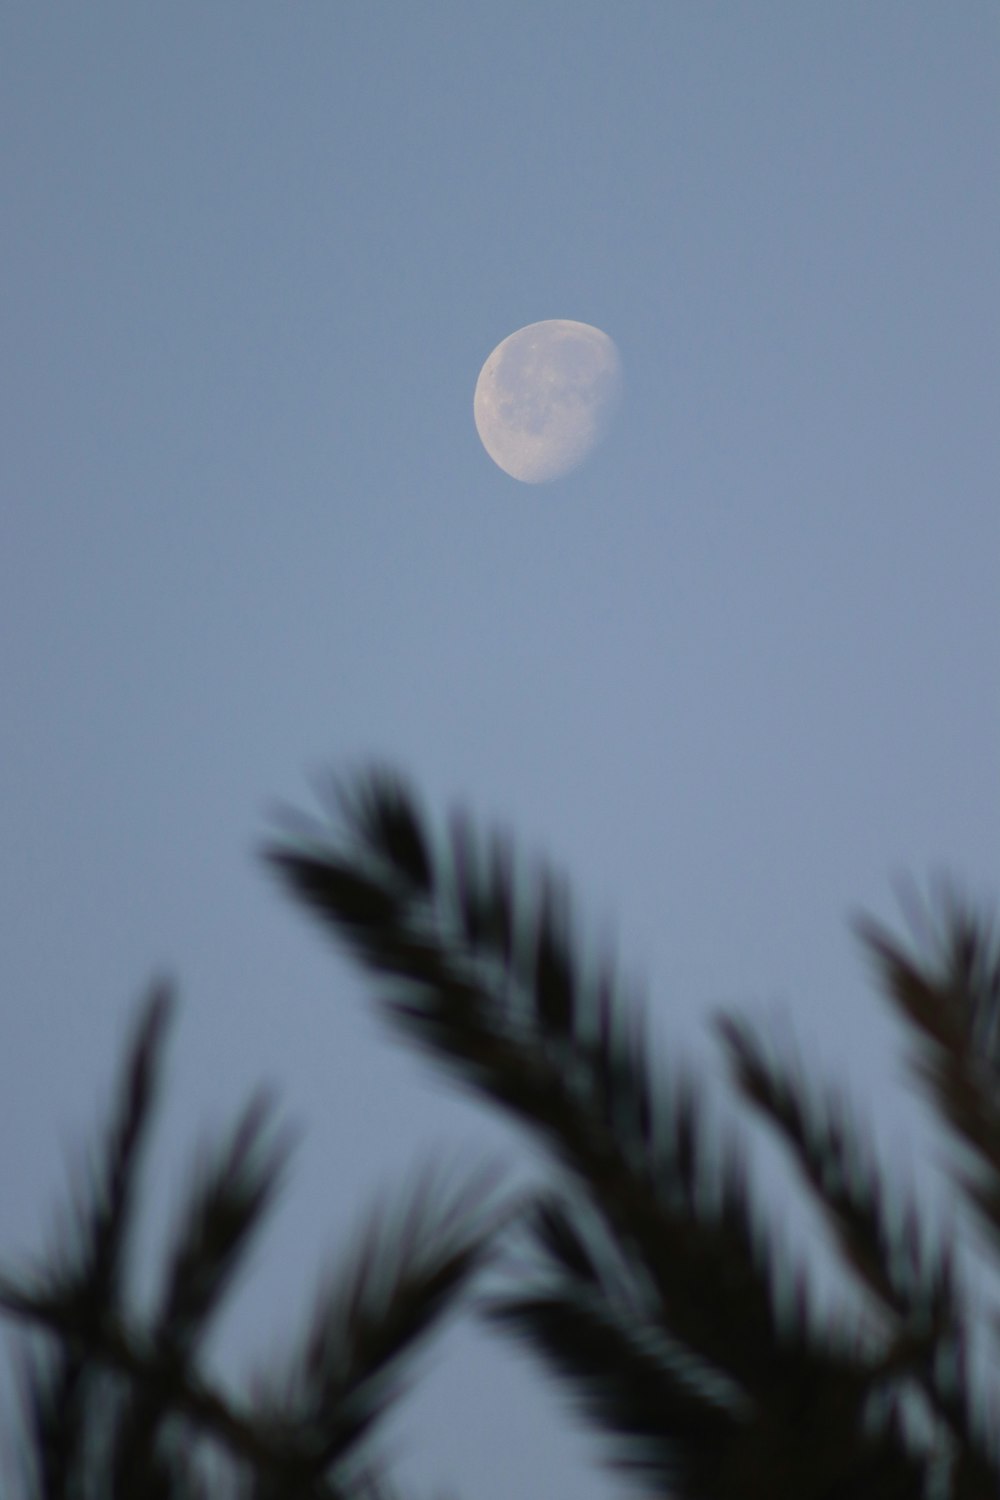 a full moon seen through the branches of a pine tree